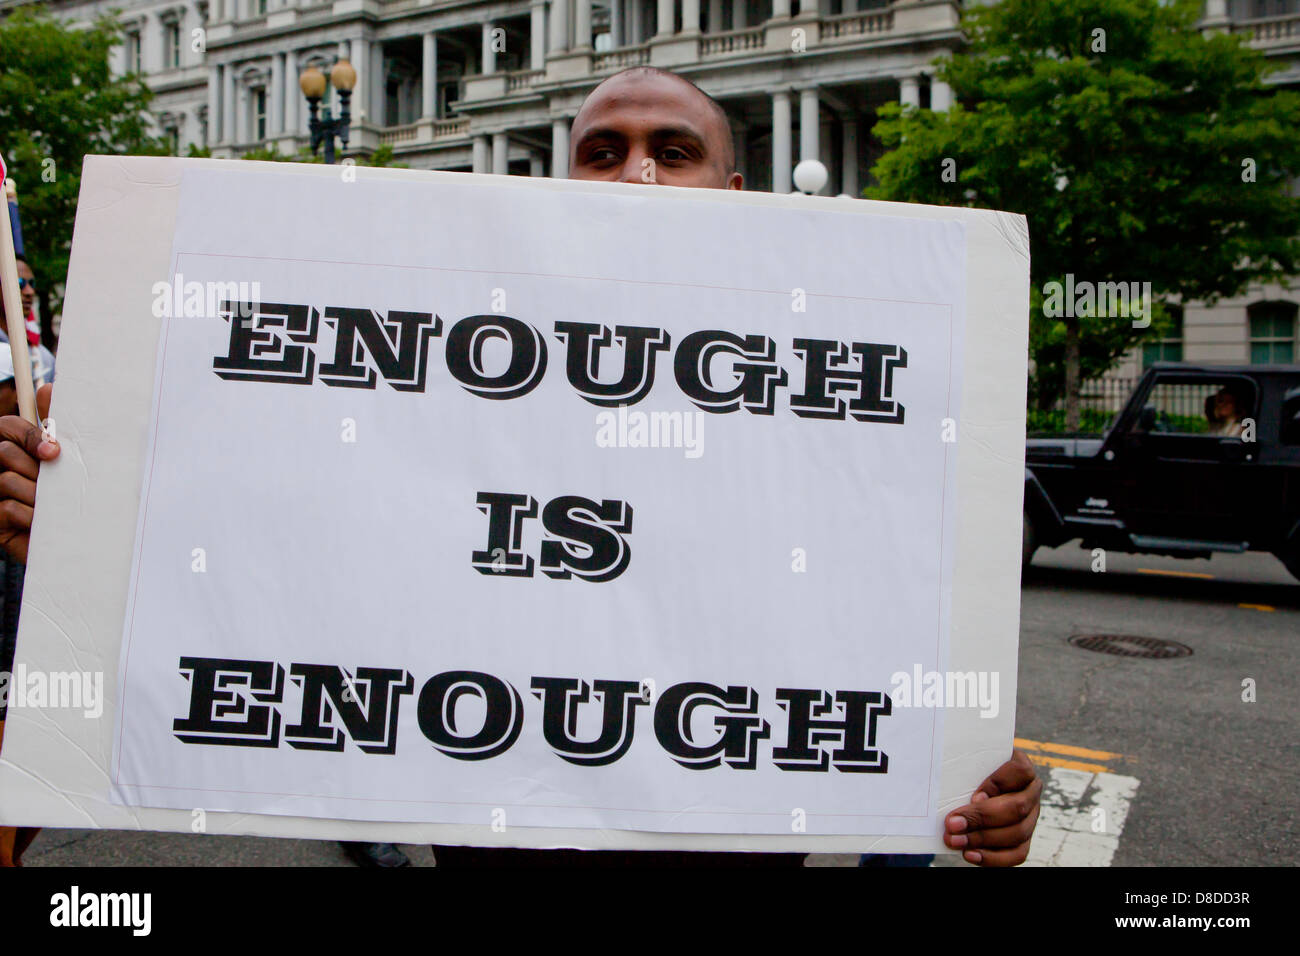 Man holding up an 'Enough is Enough' sign during protest Stock Photo